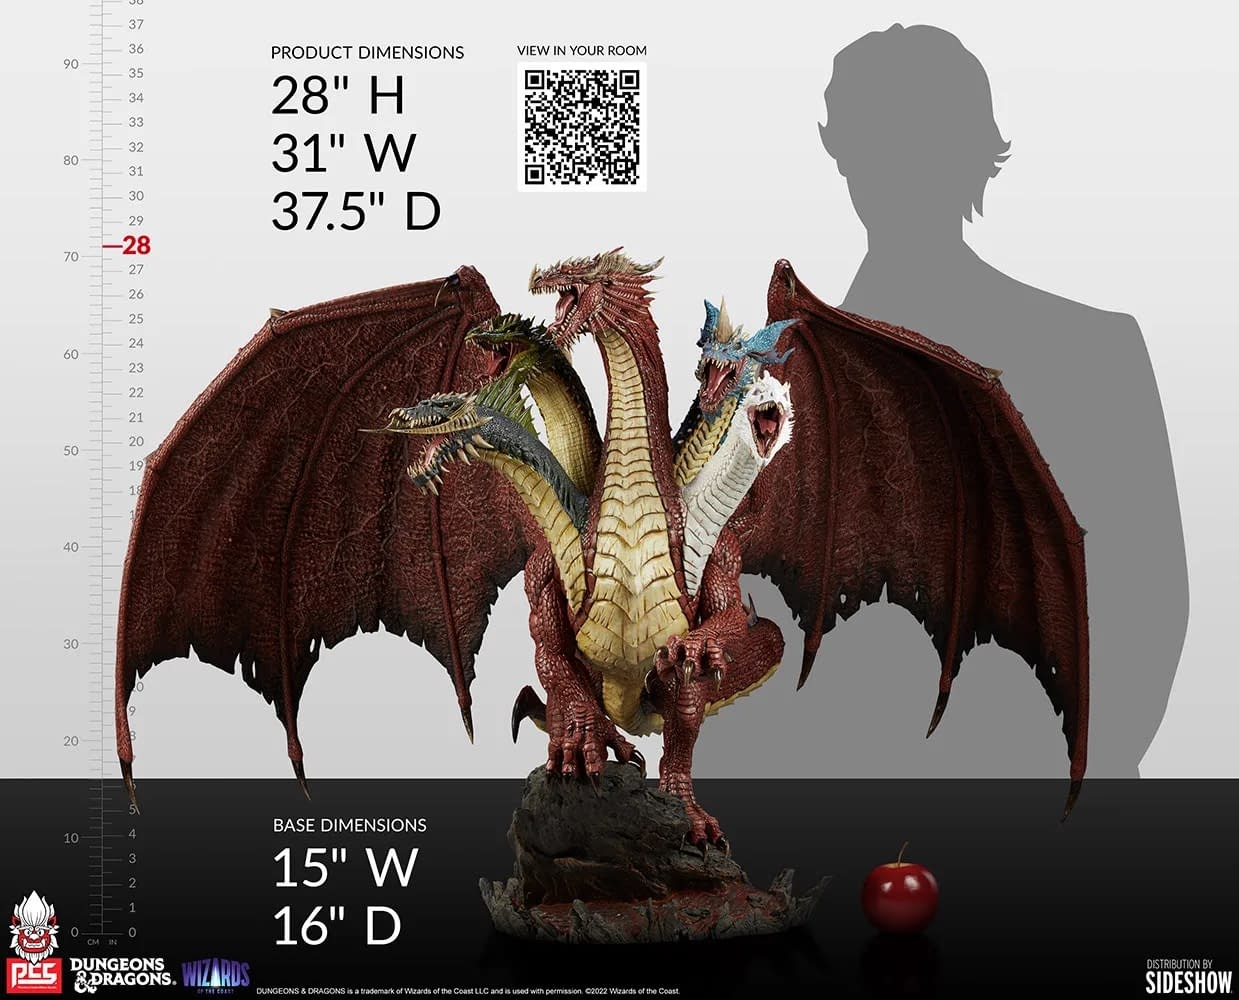 Dungeons & Dragons Tiamat Rises to Power with Incredible PCS Statue